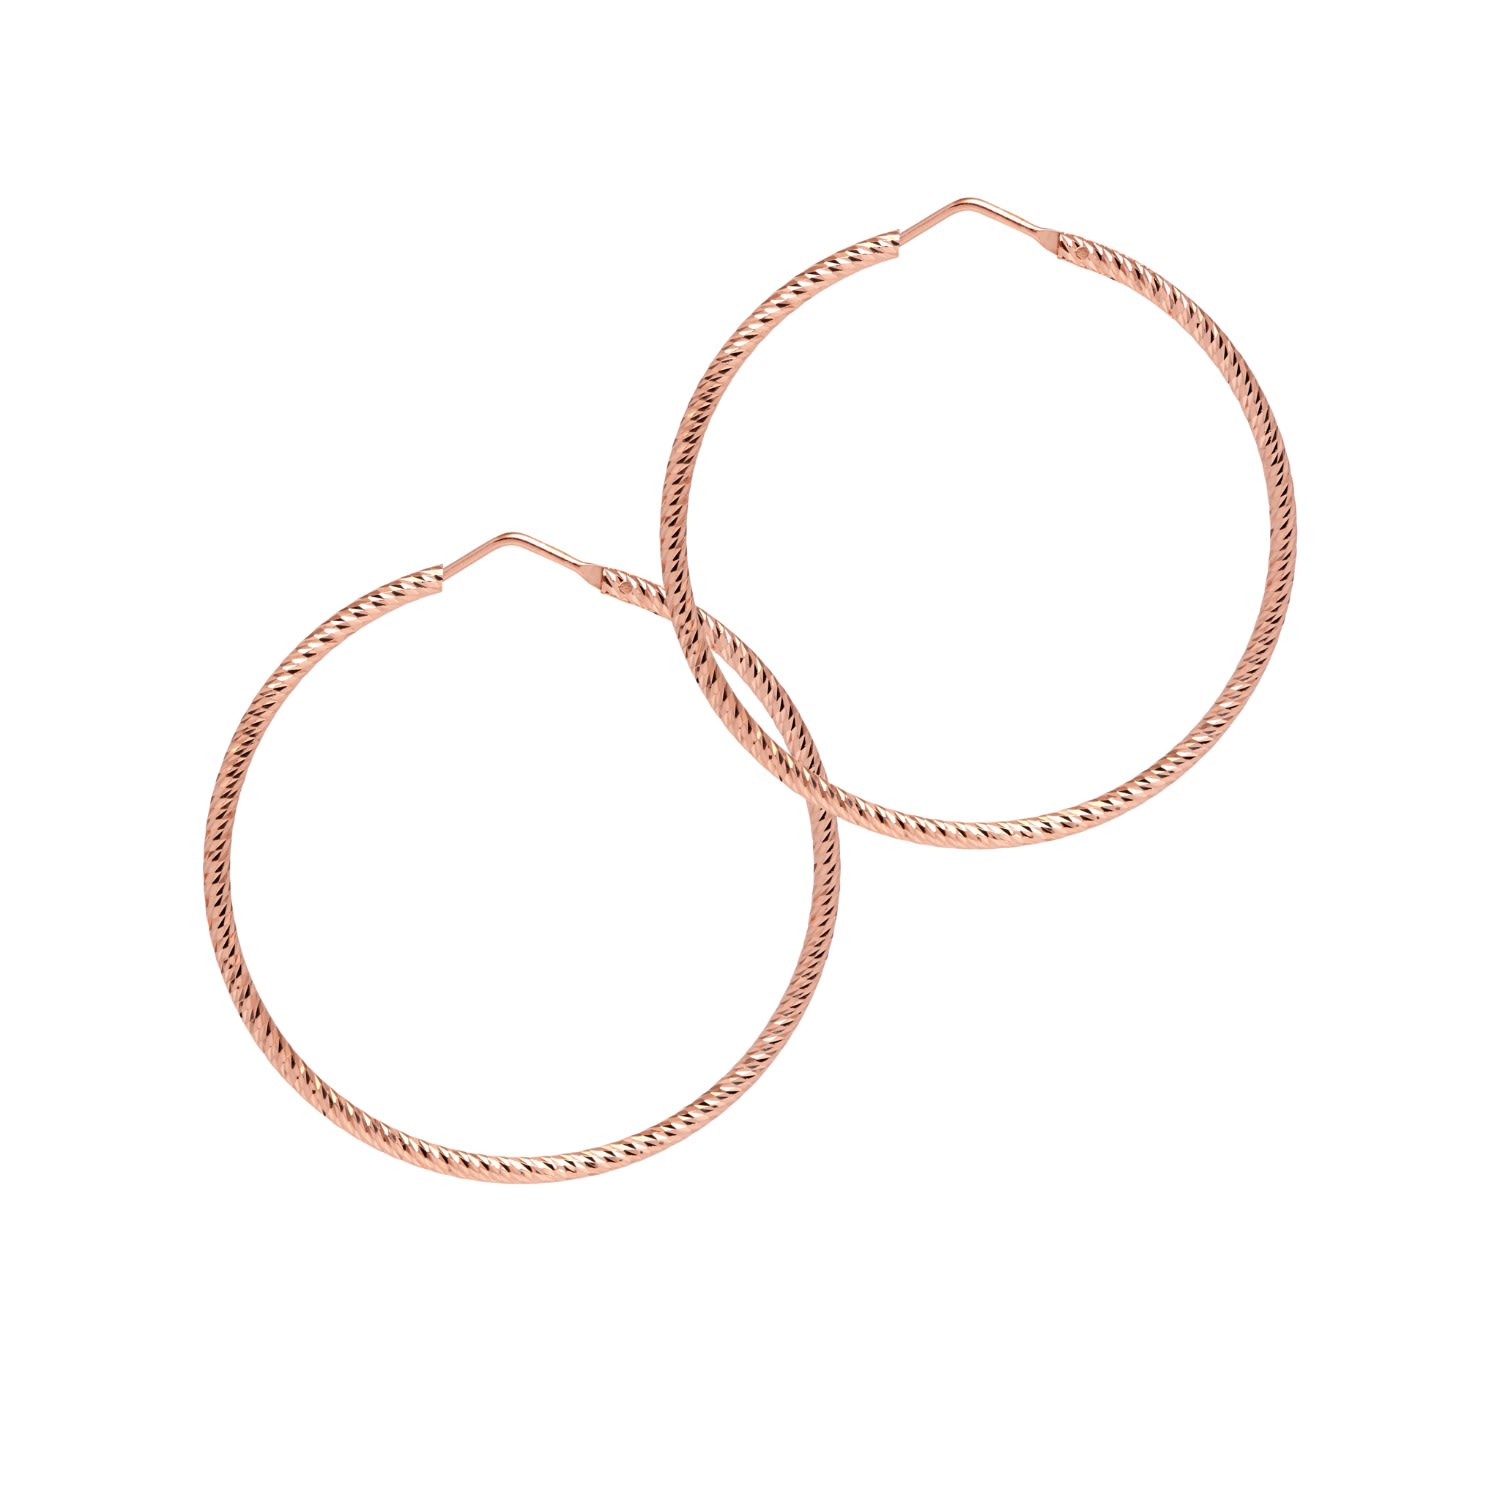 Women’s Sparkly Hoops Medium - Rose Gold The Hoop Station